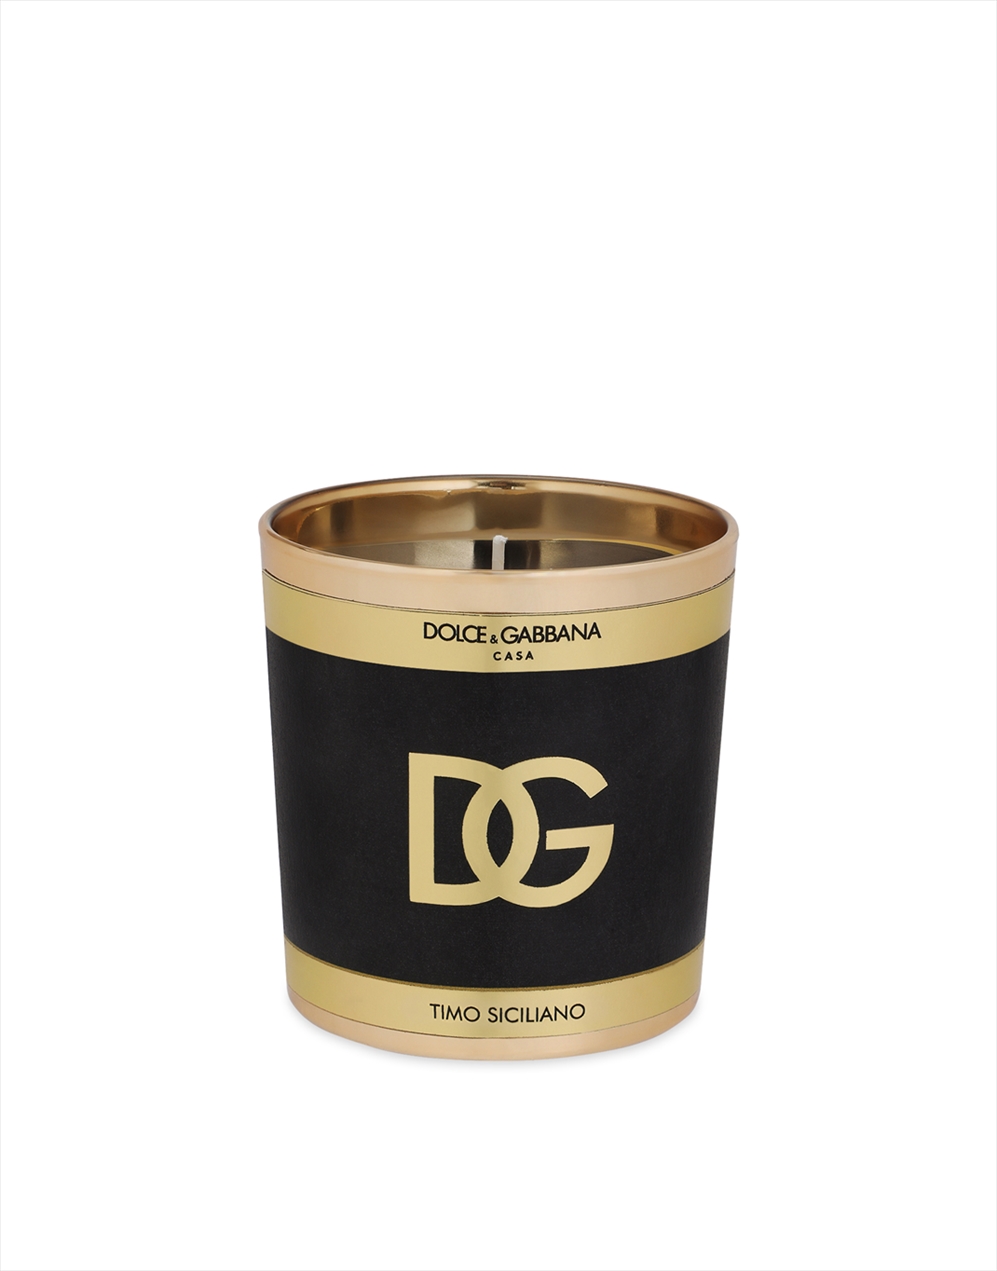 Institutional Perfumed CandleSicilian Thyme 250 Gr Dolce Gabbana